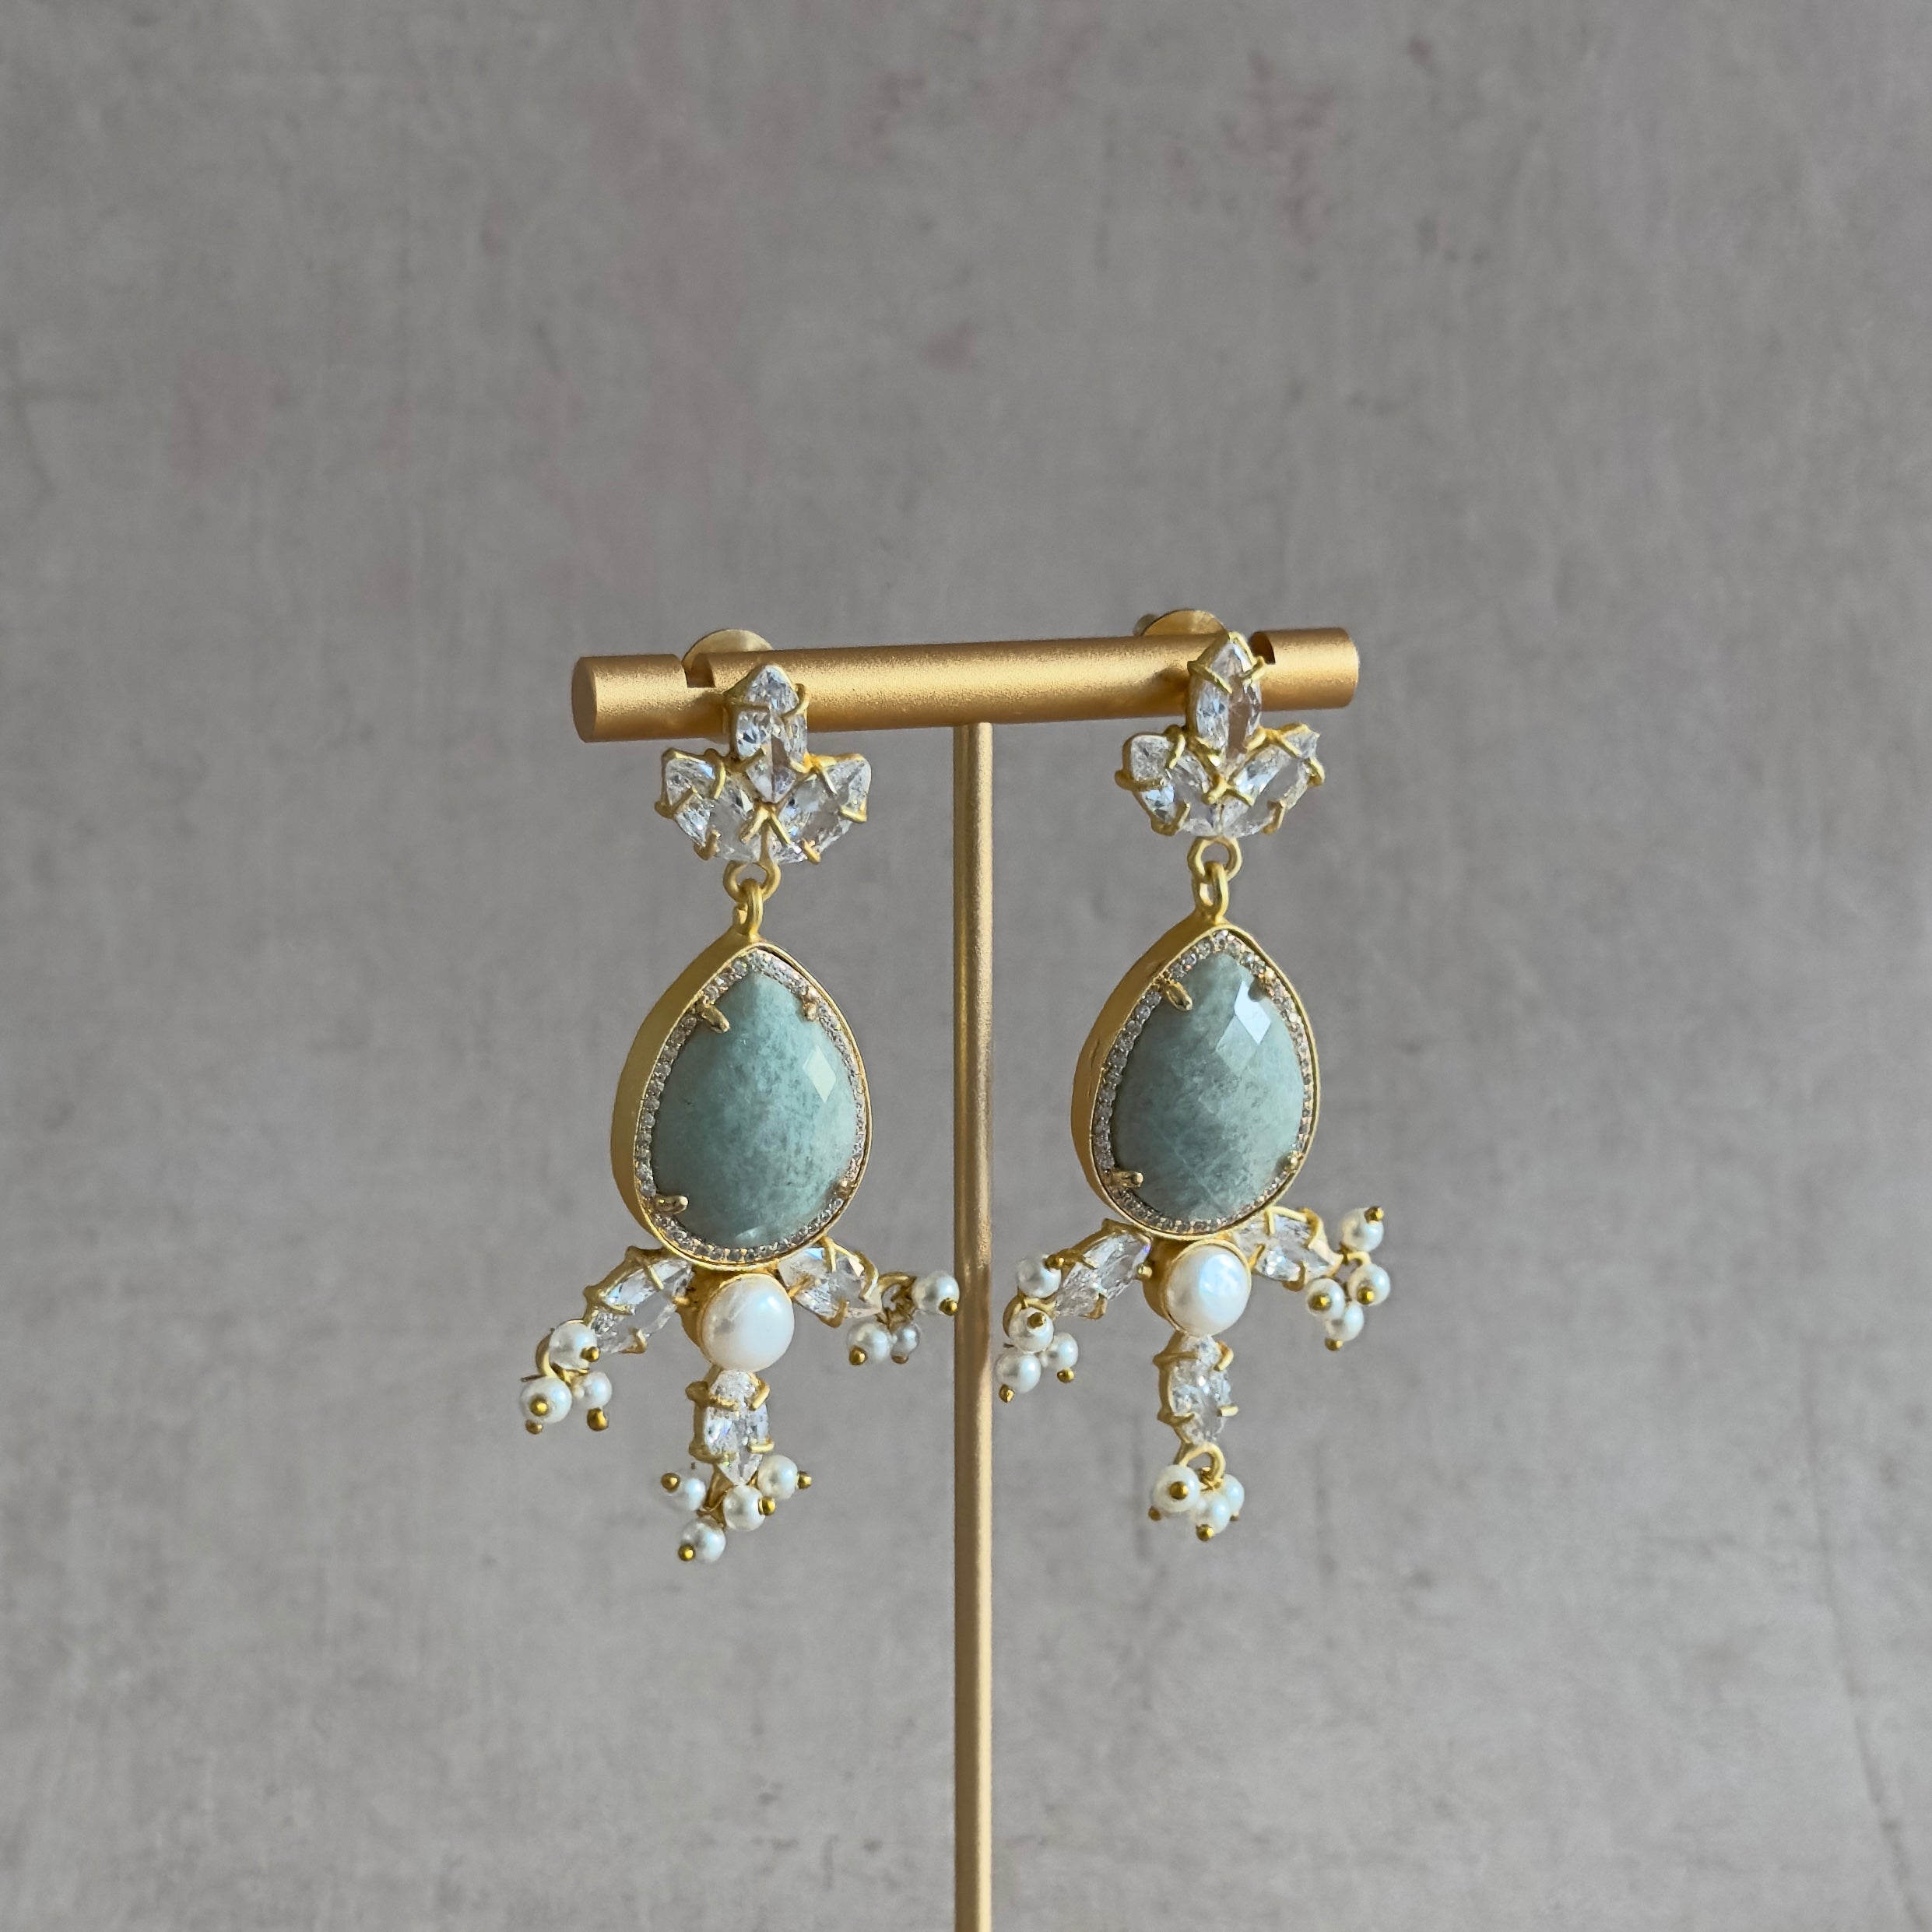 Add elegance to your look with the Simone Jade Crystal Drop Earrings. Crafted with amazonite stones, cz crystals, and pearl accents, these earrings will bring sophistication and beauty to any occasion. Ready to make a bold statement? Elevate your style with the Simone.